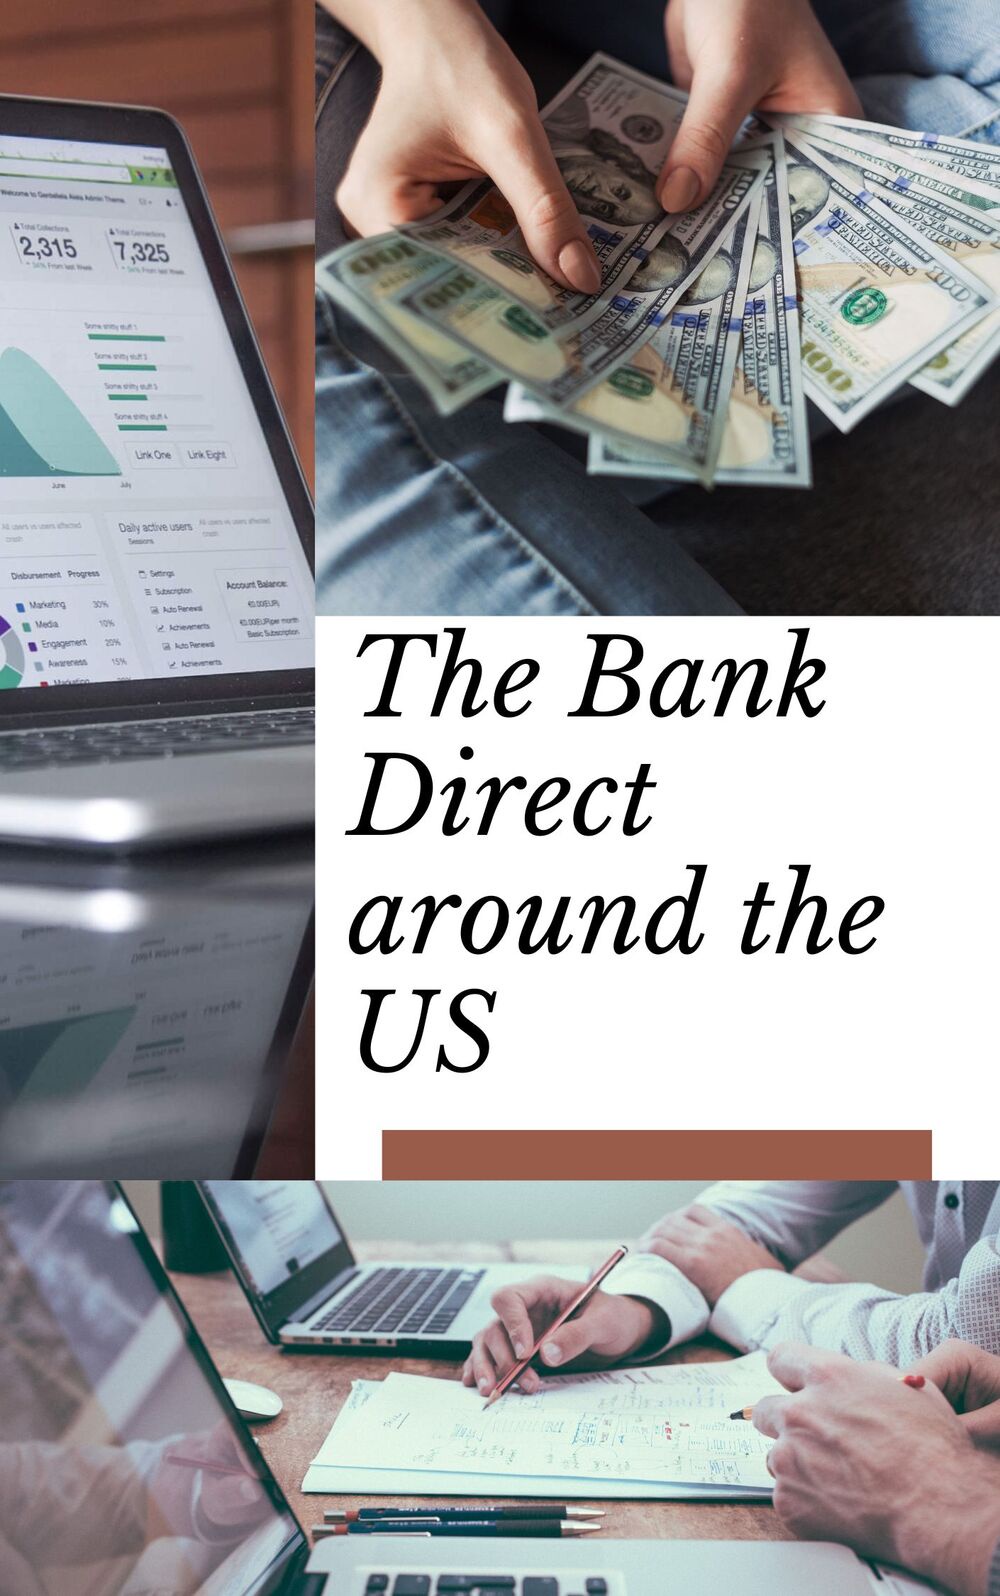 Demystifying Banking in the USA: The Role of Bank Directors and Routing Numbers